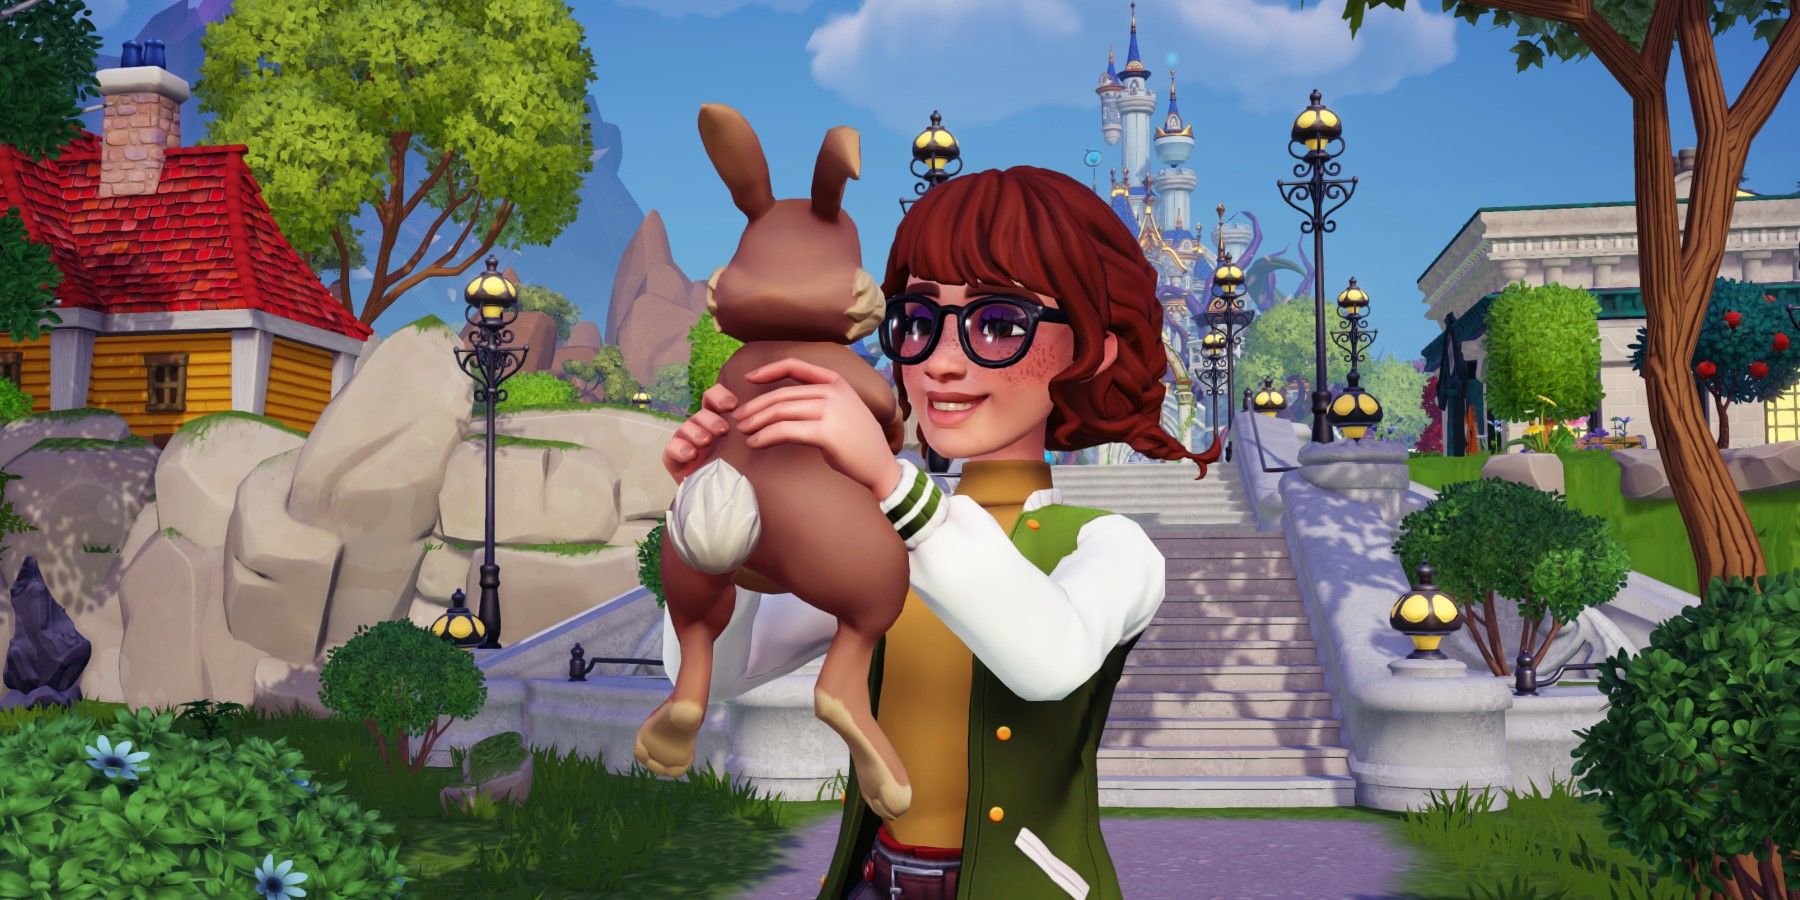 Disney Dreamlight Valley: Pride Of The Valley Update Release Date And  Contents